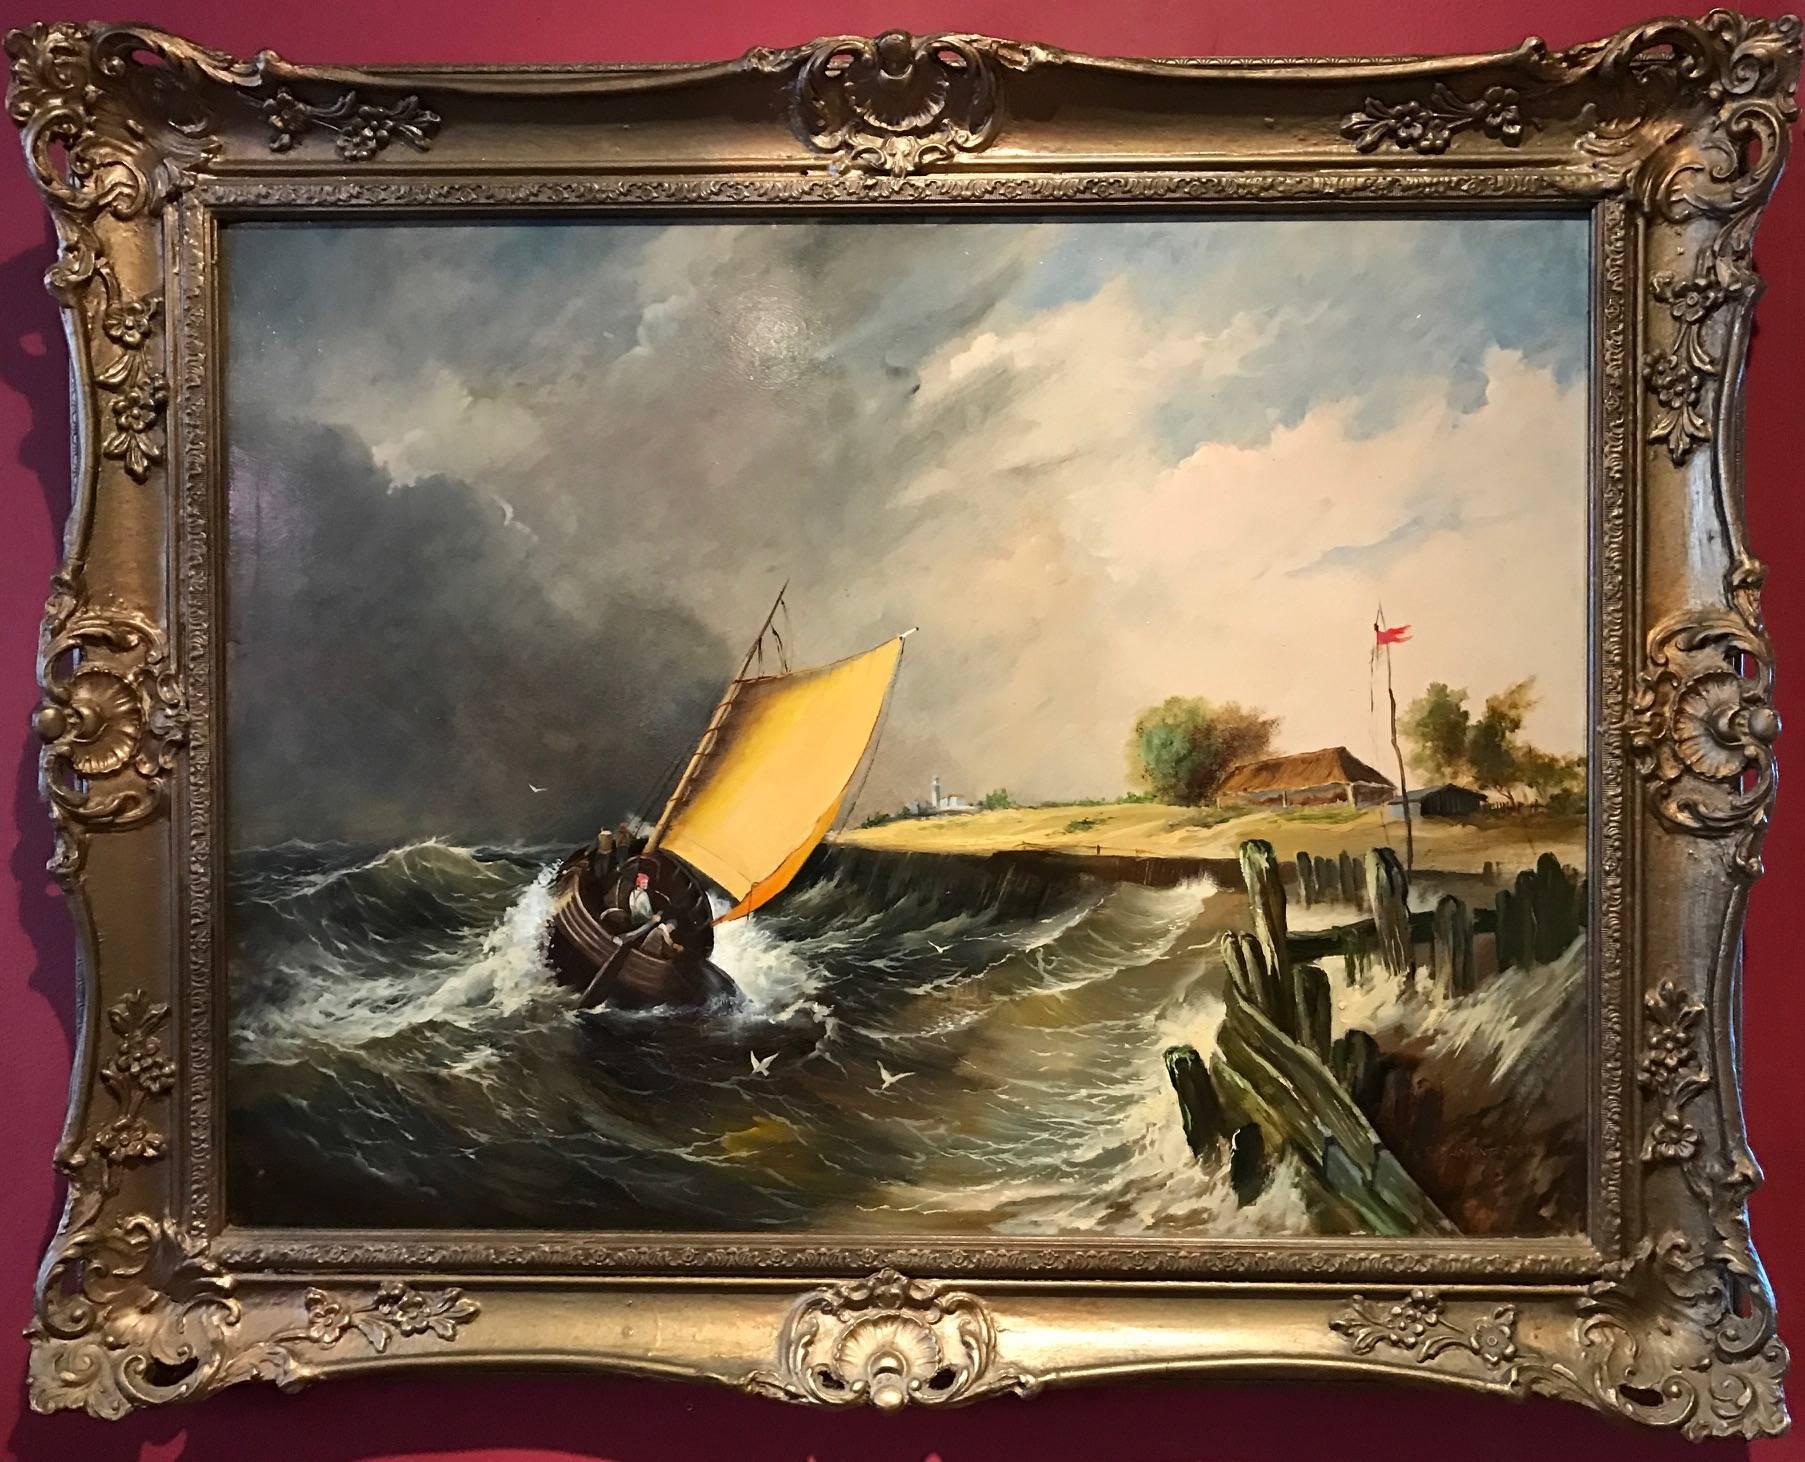 Robert Dumont-Smith Landscape Painting - Fine British Maritime Oil Painting - Fishing Boat on Rough Seas - Signed